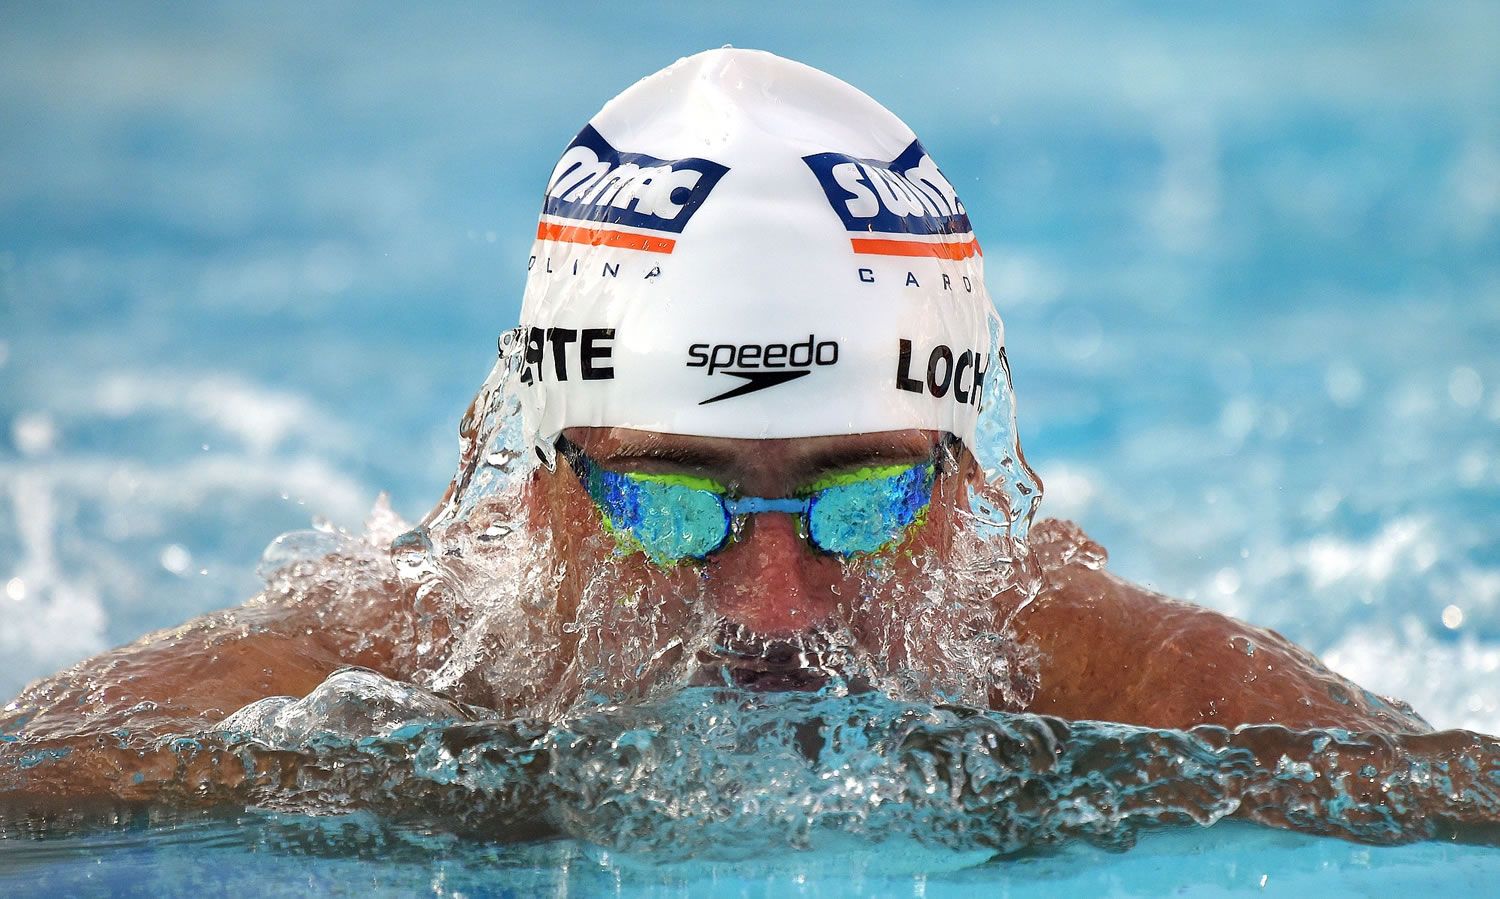 Ryan Lockte swims the breaststroke in the men's 200-meter individual medley at the U.S. nationals of swimming, Sunday, Aug. 10, 2014, in Irvine, Calif. Lockte won the event. (AP Photo/Mark J.